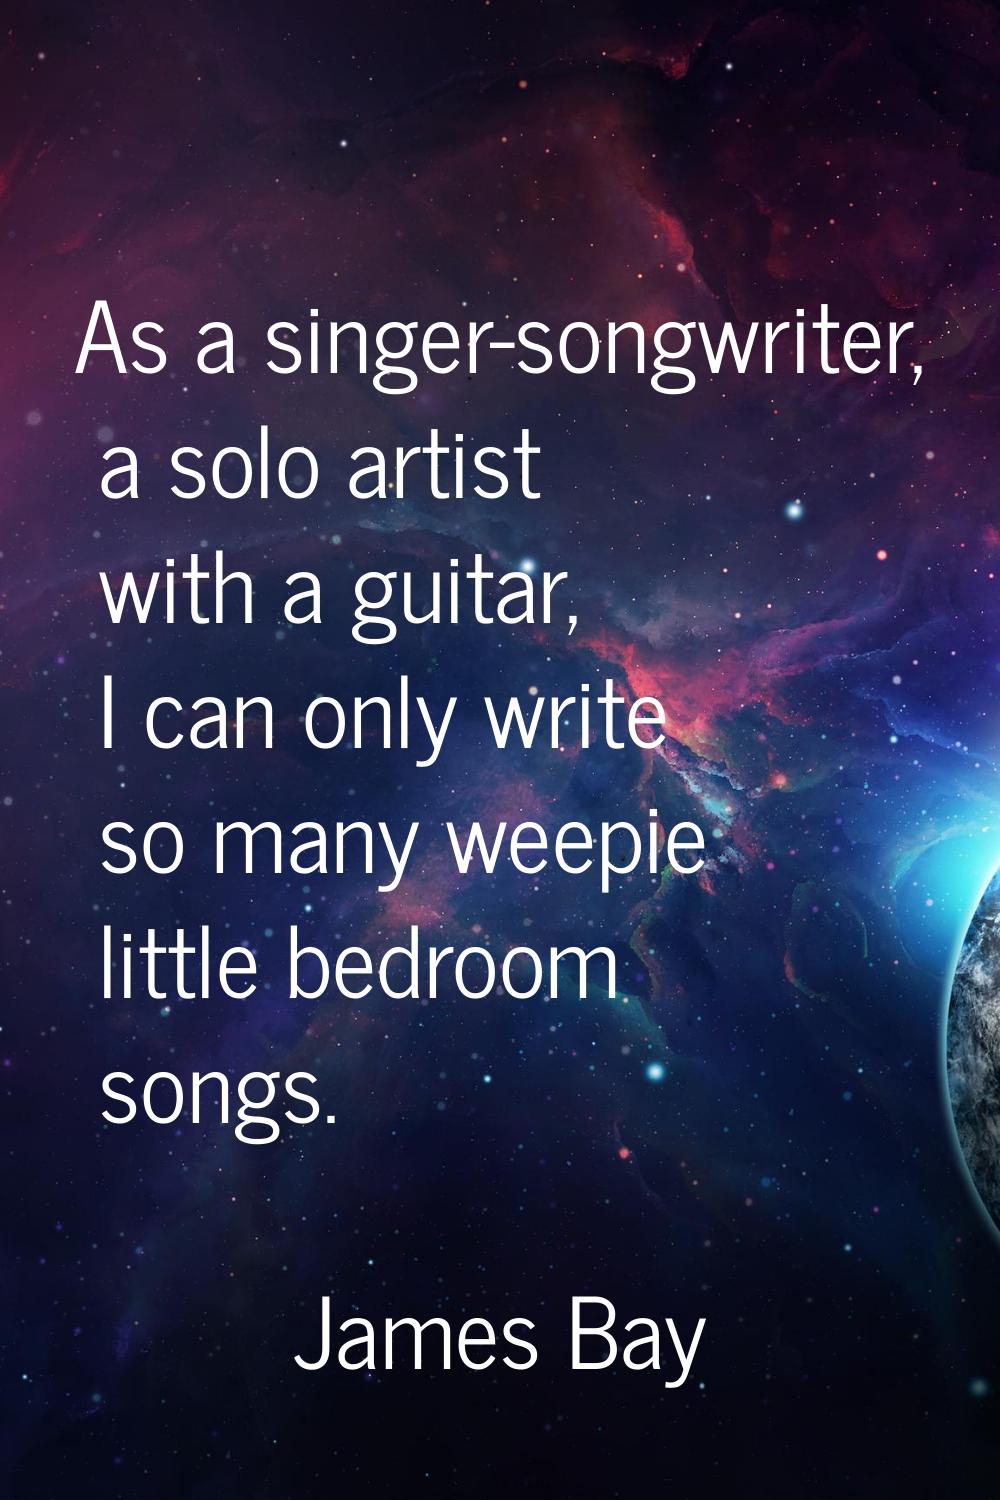 As a singer-songwriter, a solo artist with a guitar, I can only write so many weepie little bedroom